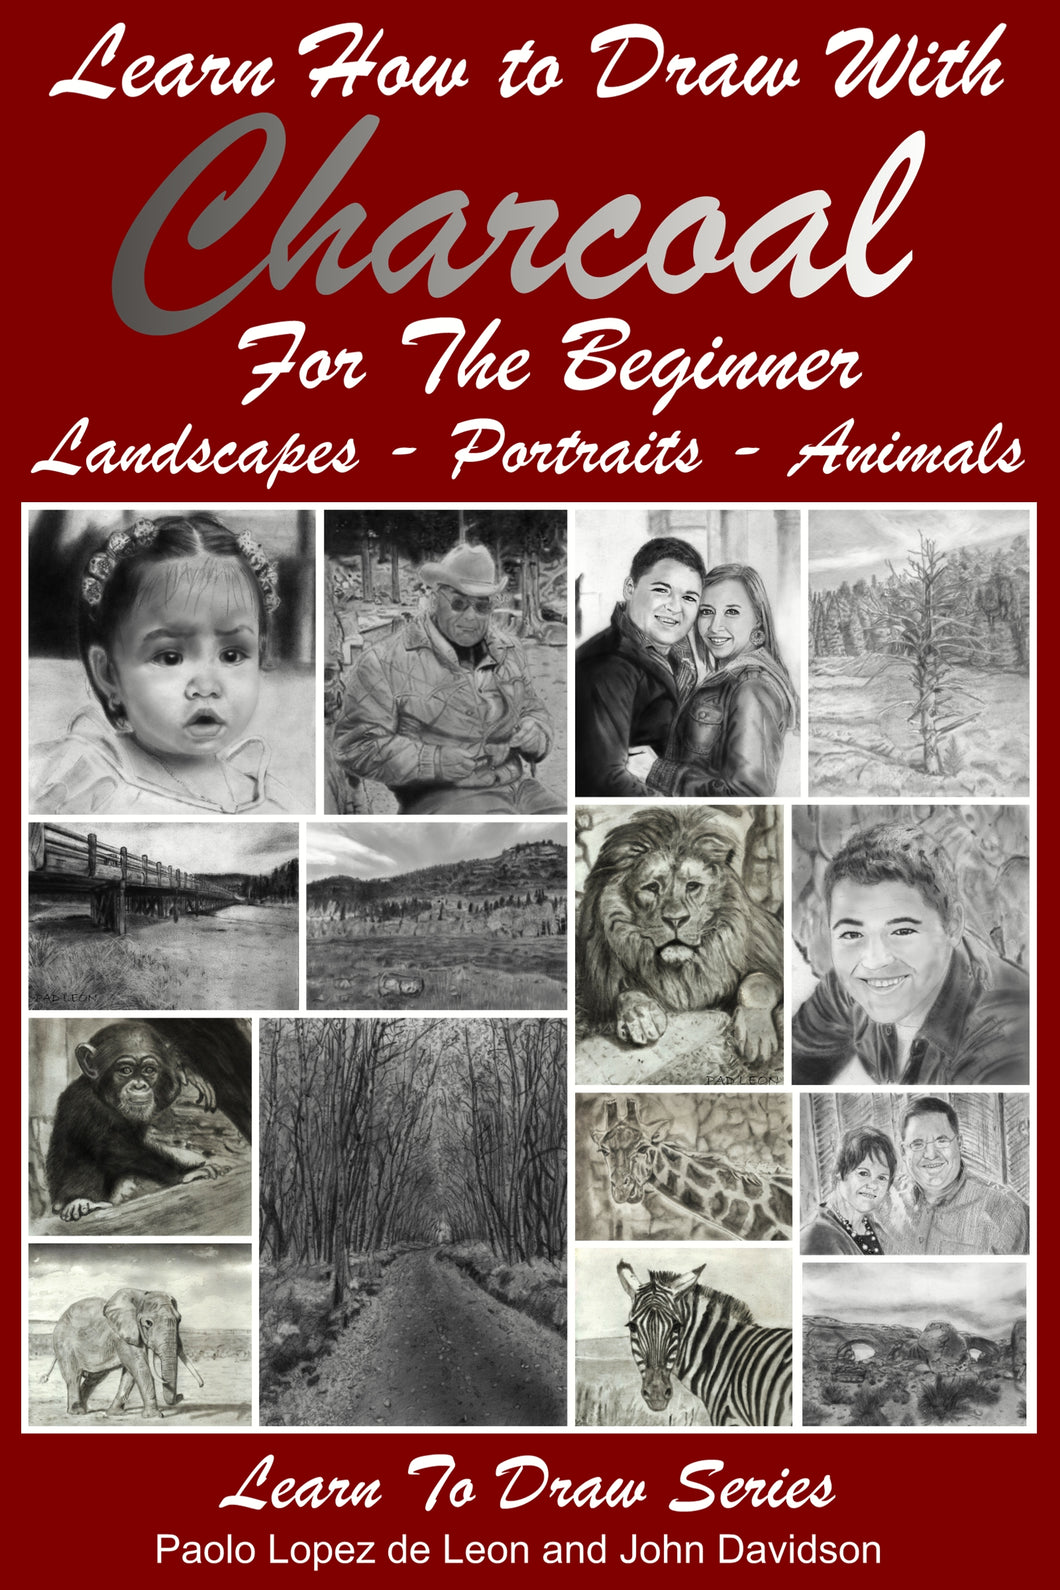 Learn How to Draw with Charcoal For The Beginner - Landscapes – Portraits - Animals